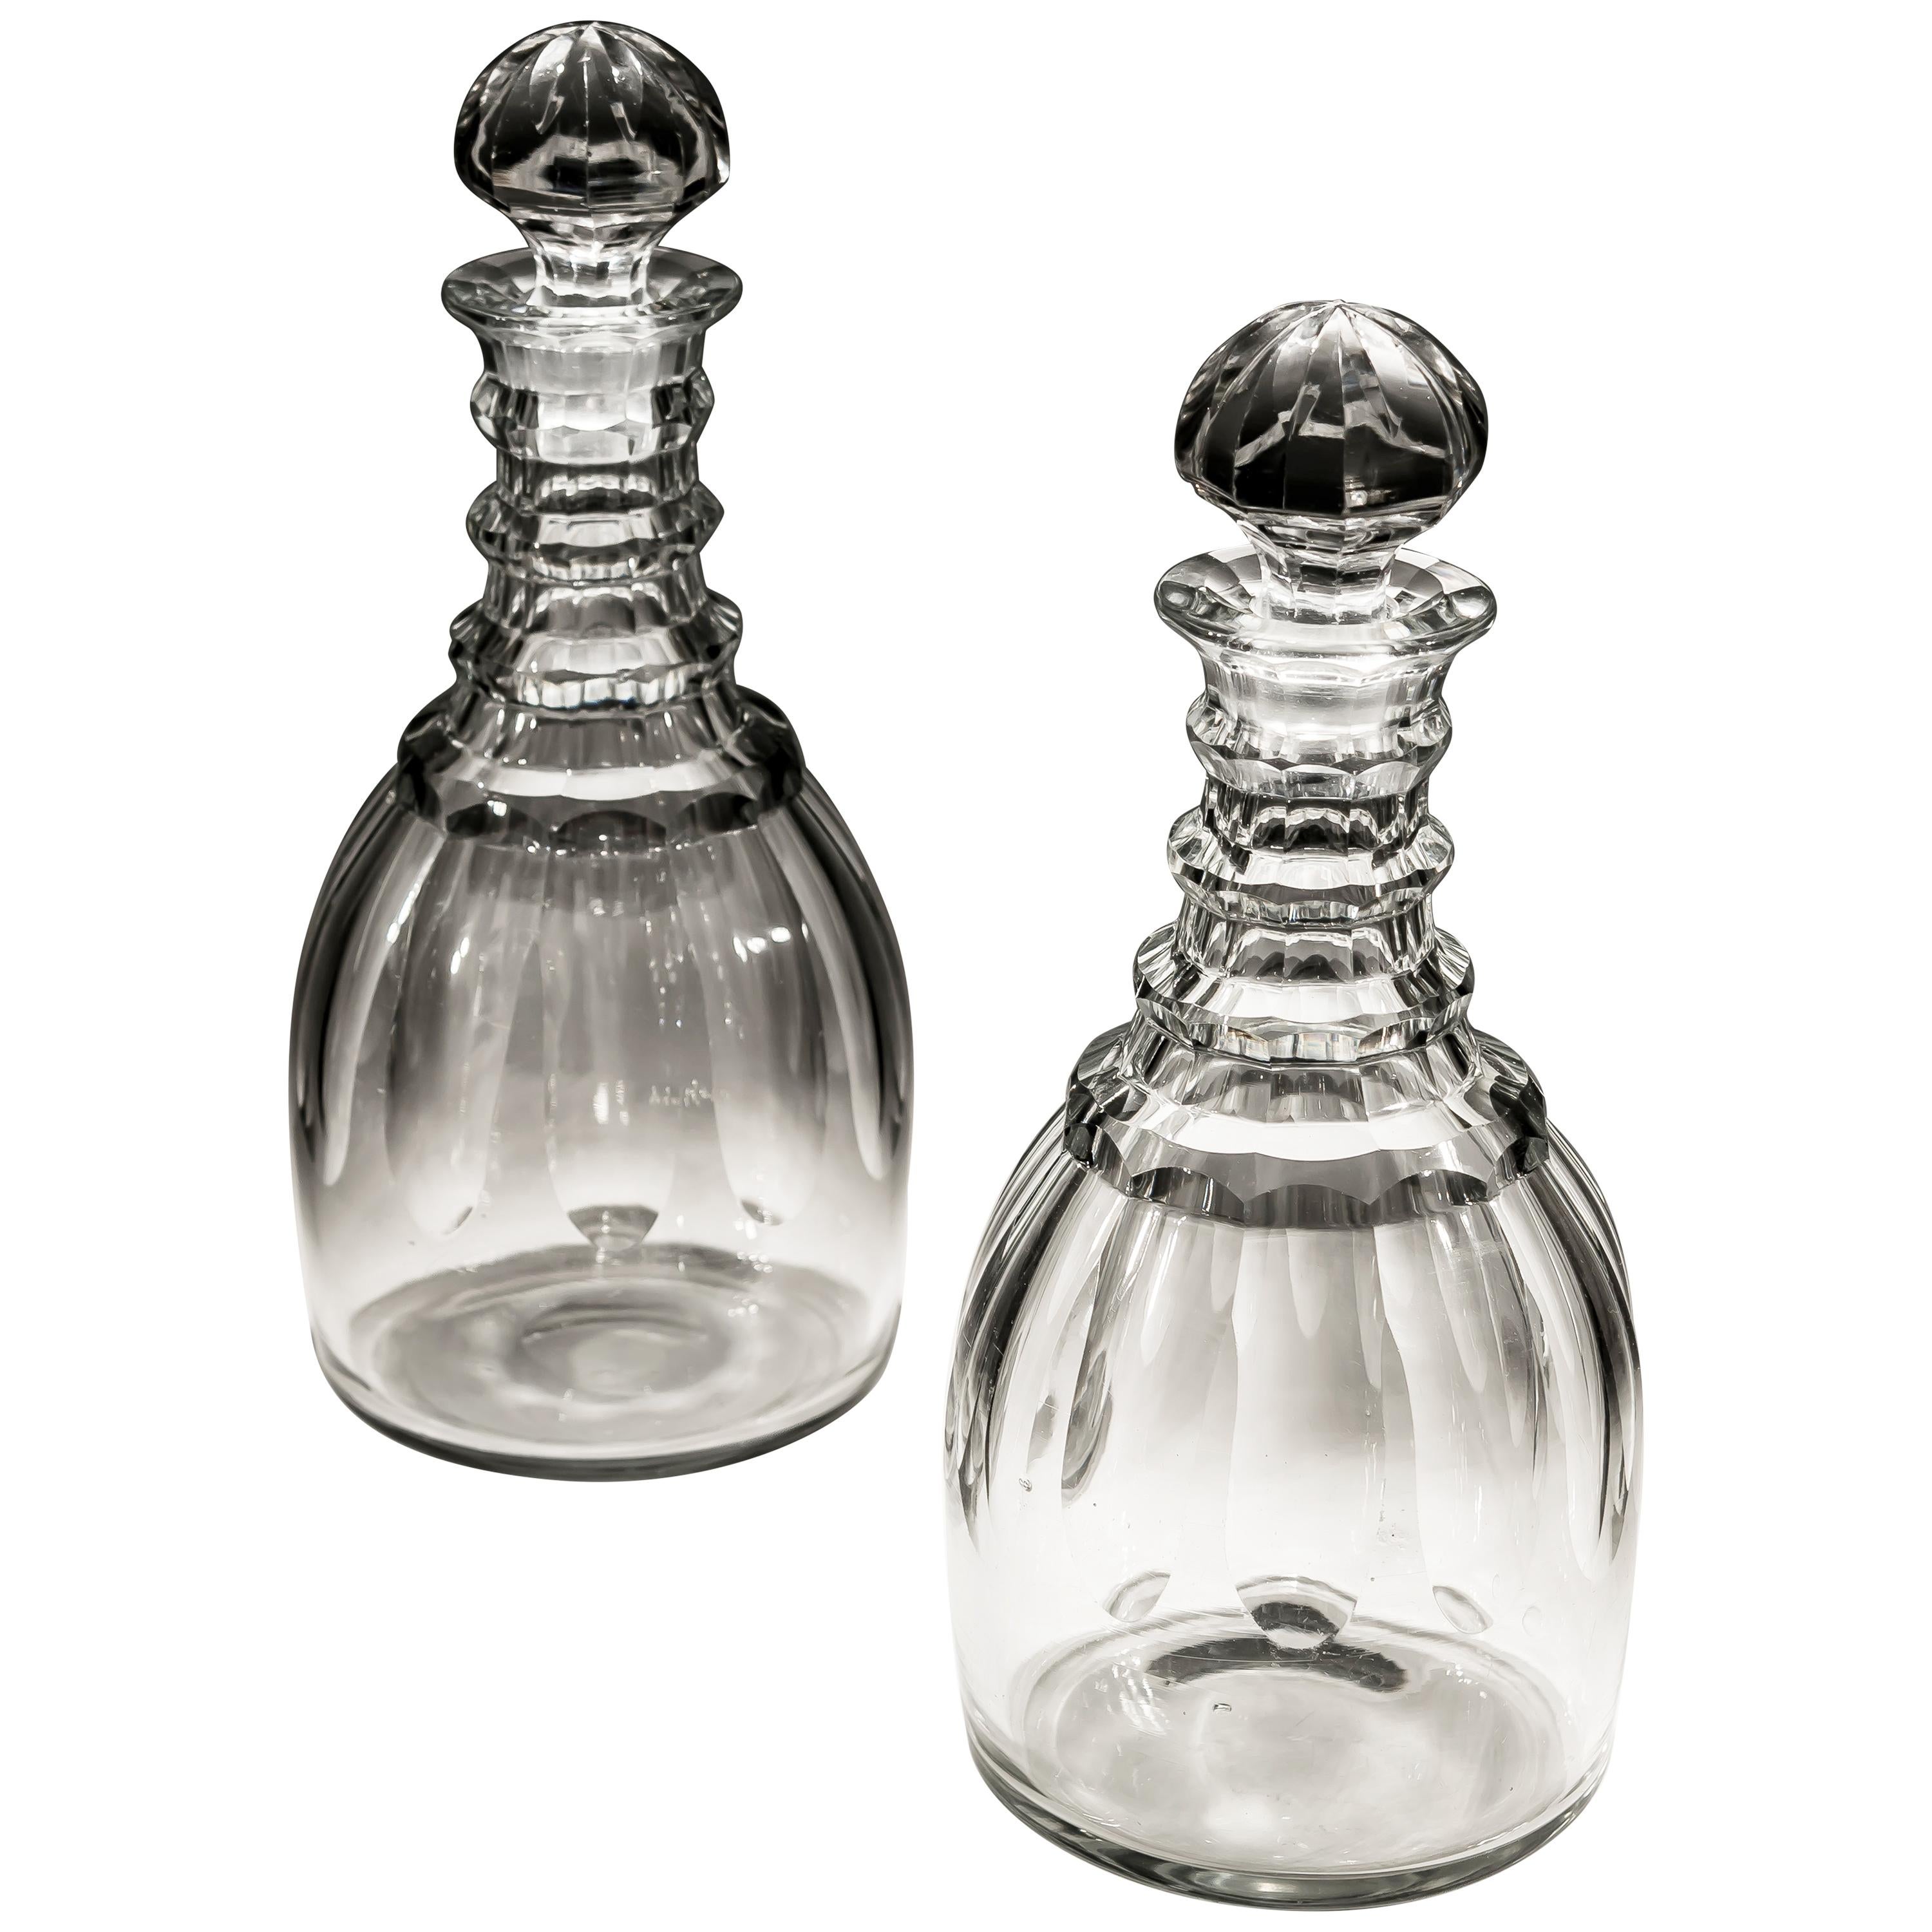 Pair of Slice Cut Georgian Decanters with Faceted Rings